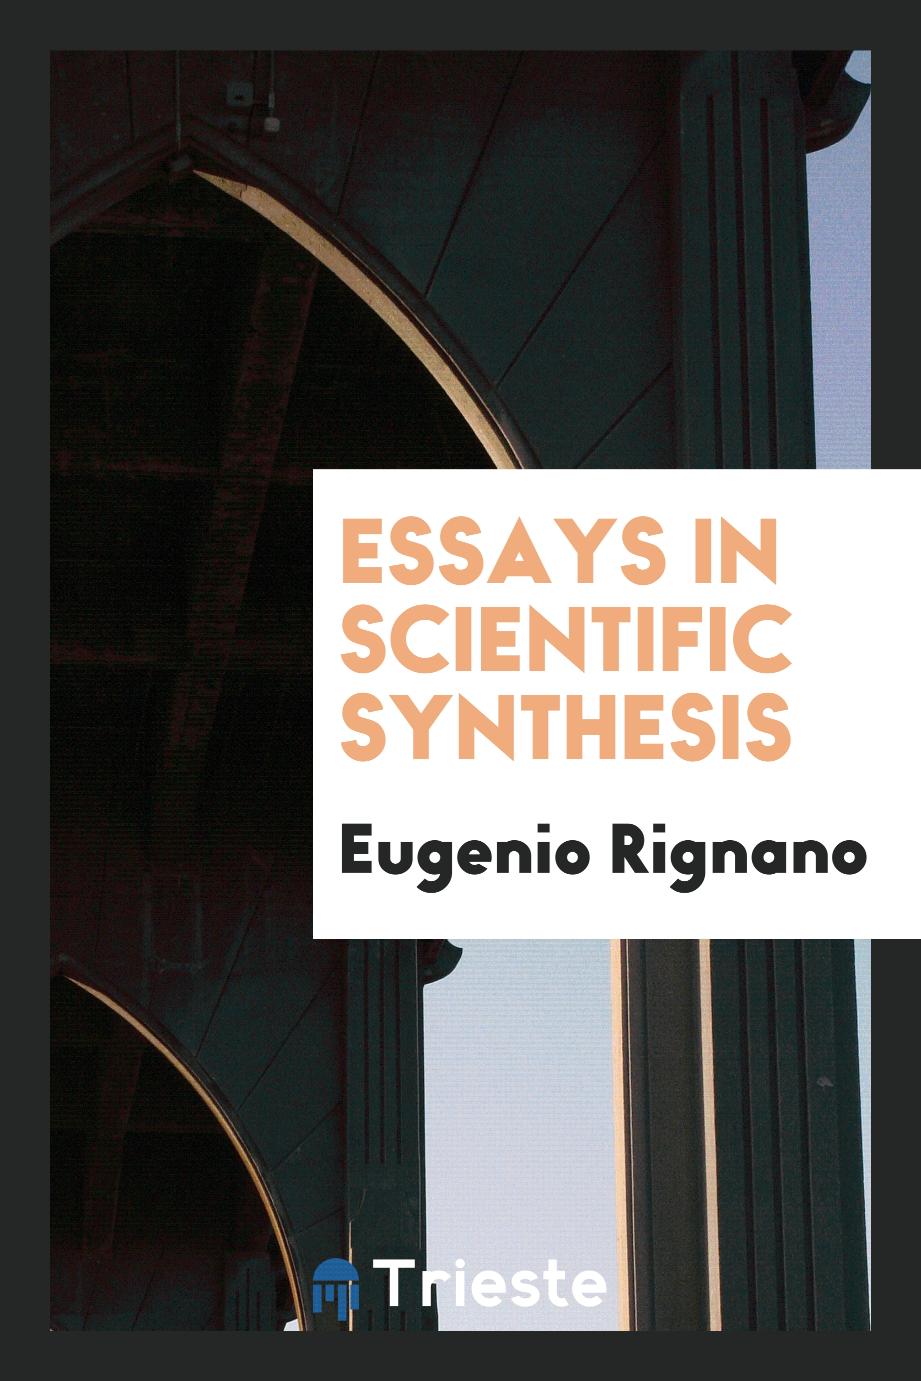 Essays in scientific synthesis